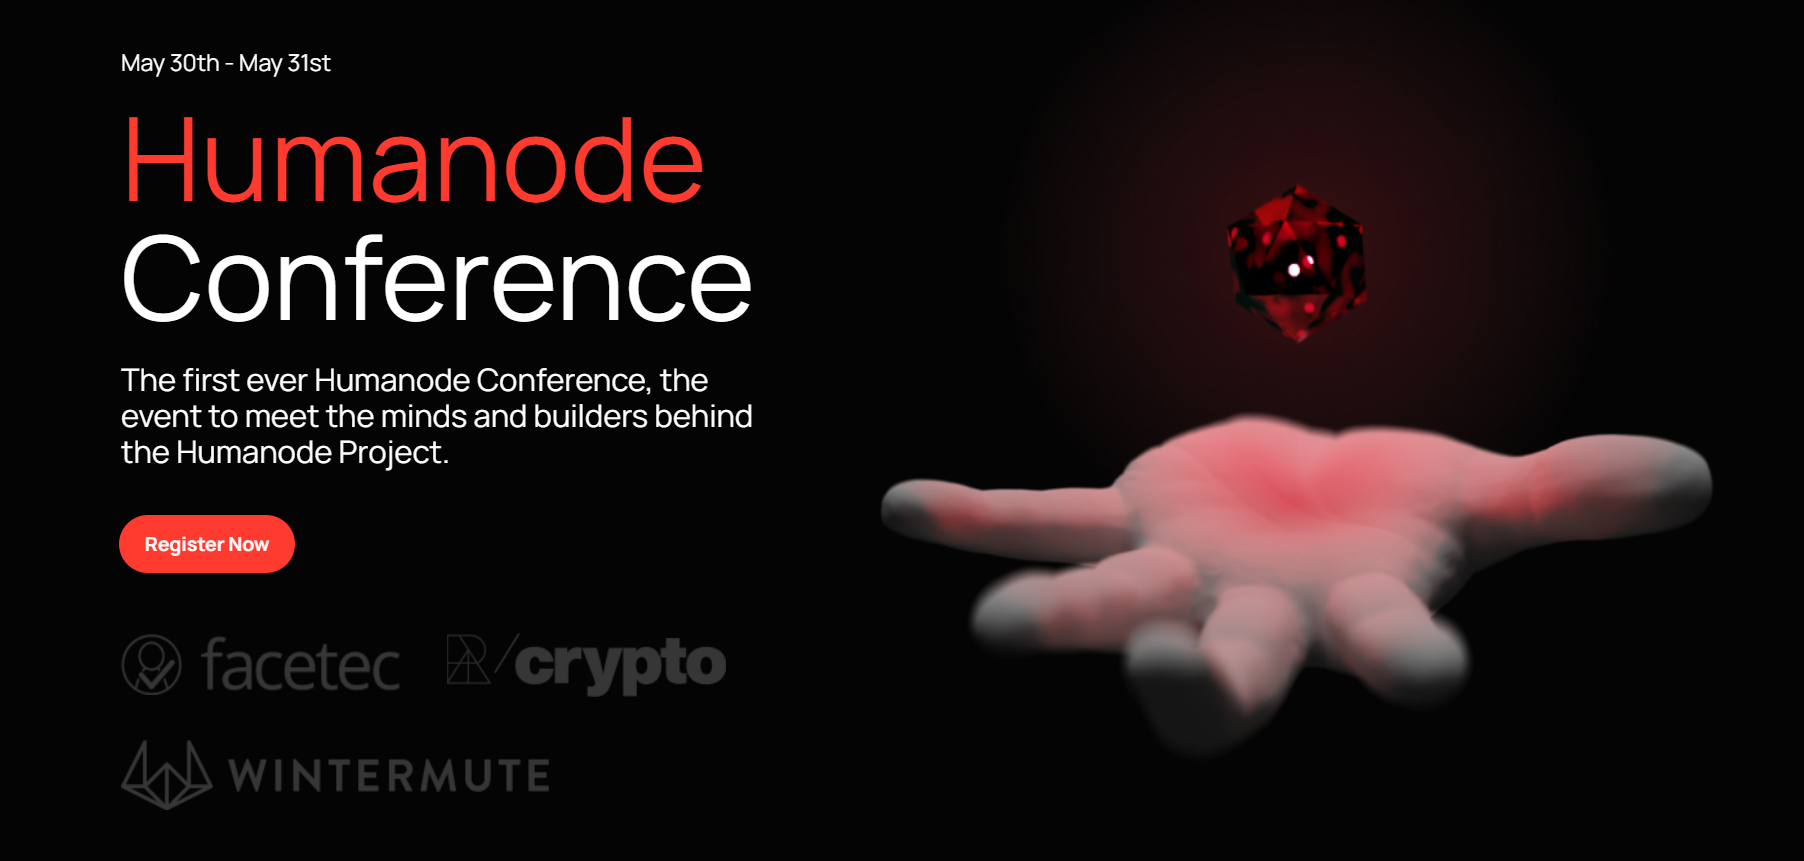 Registration for the Humanode Conference is live